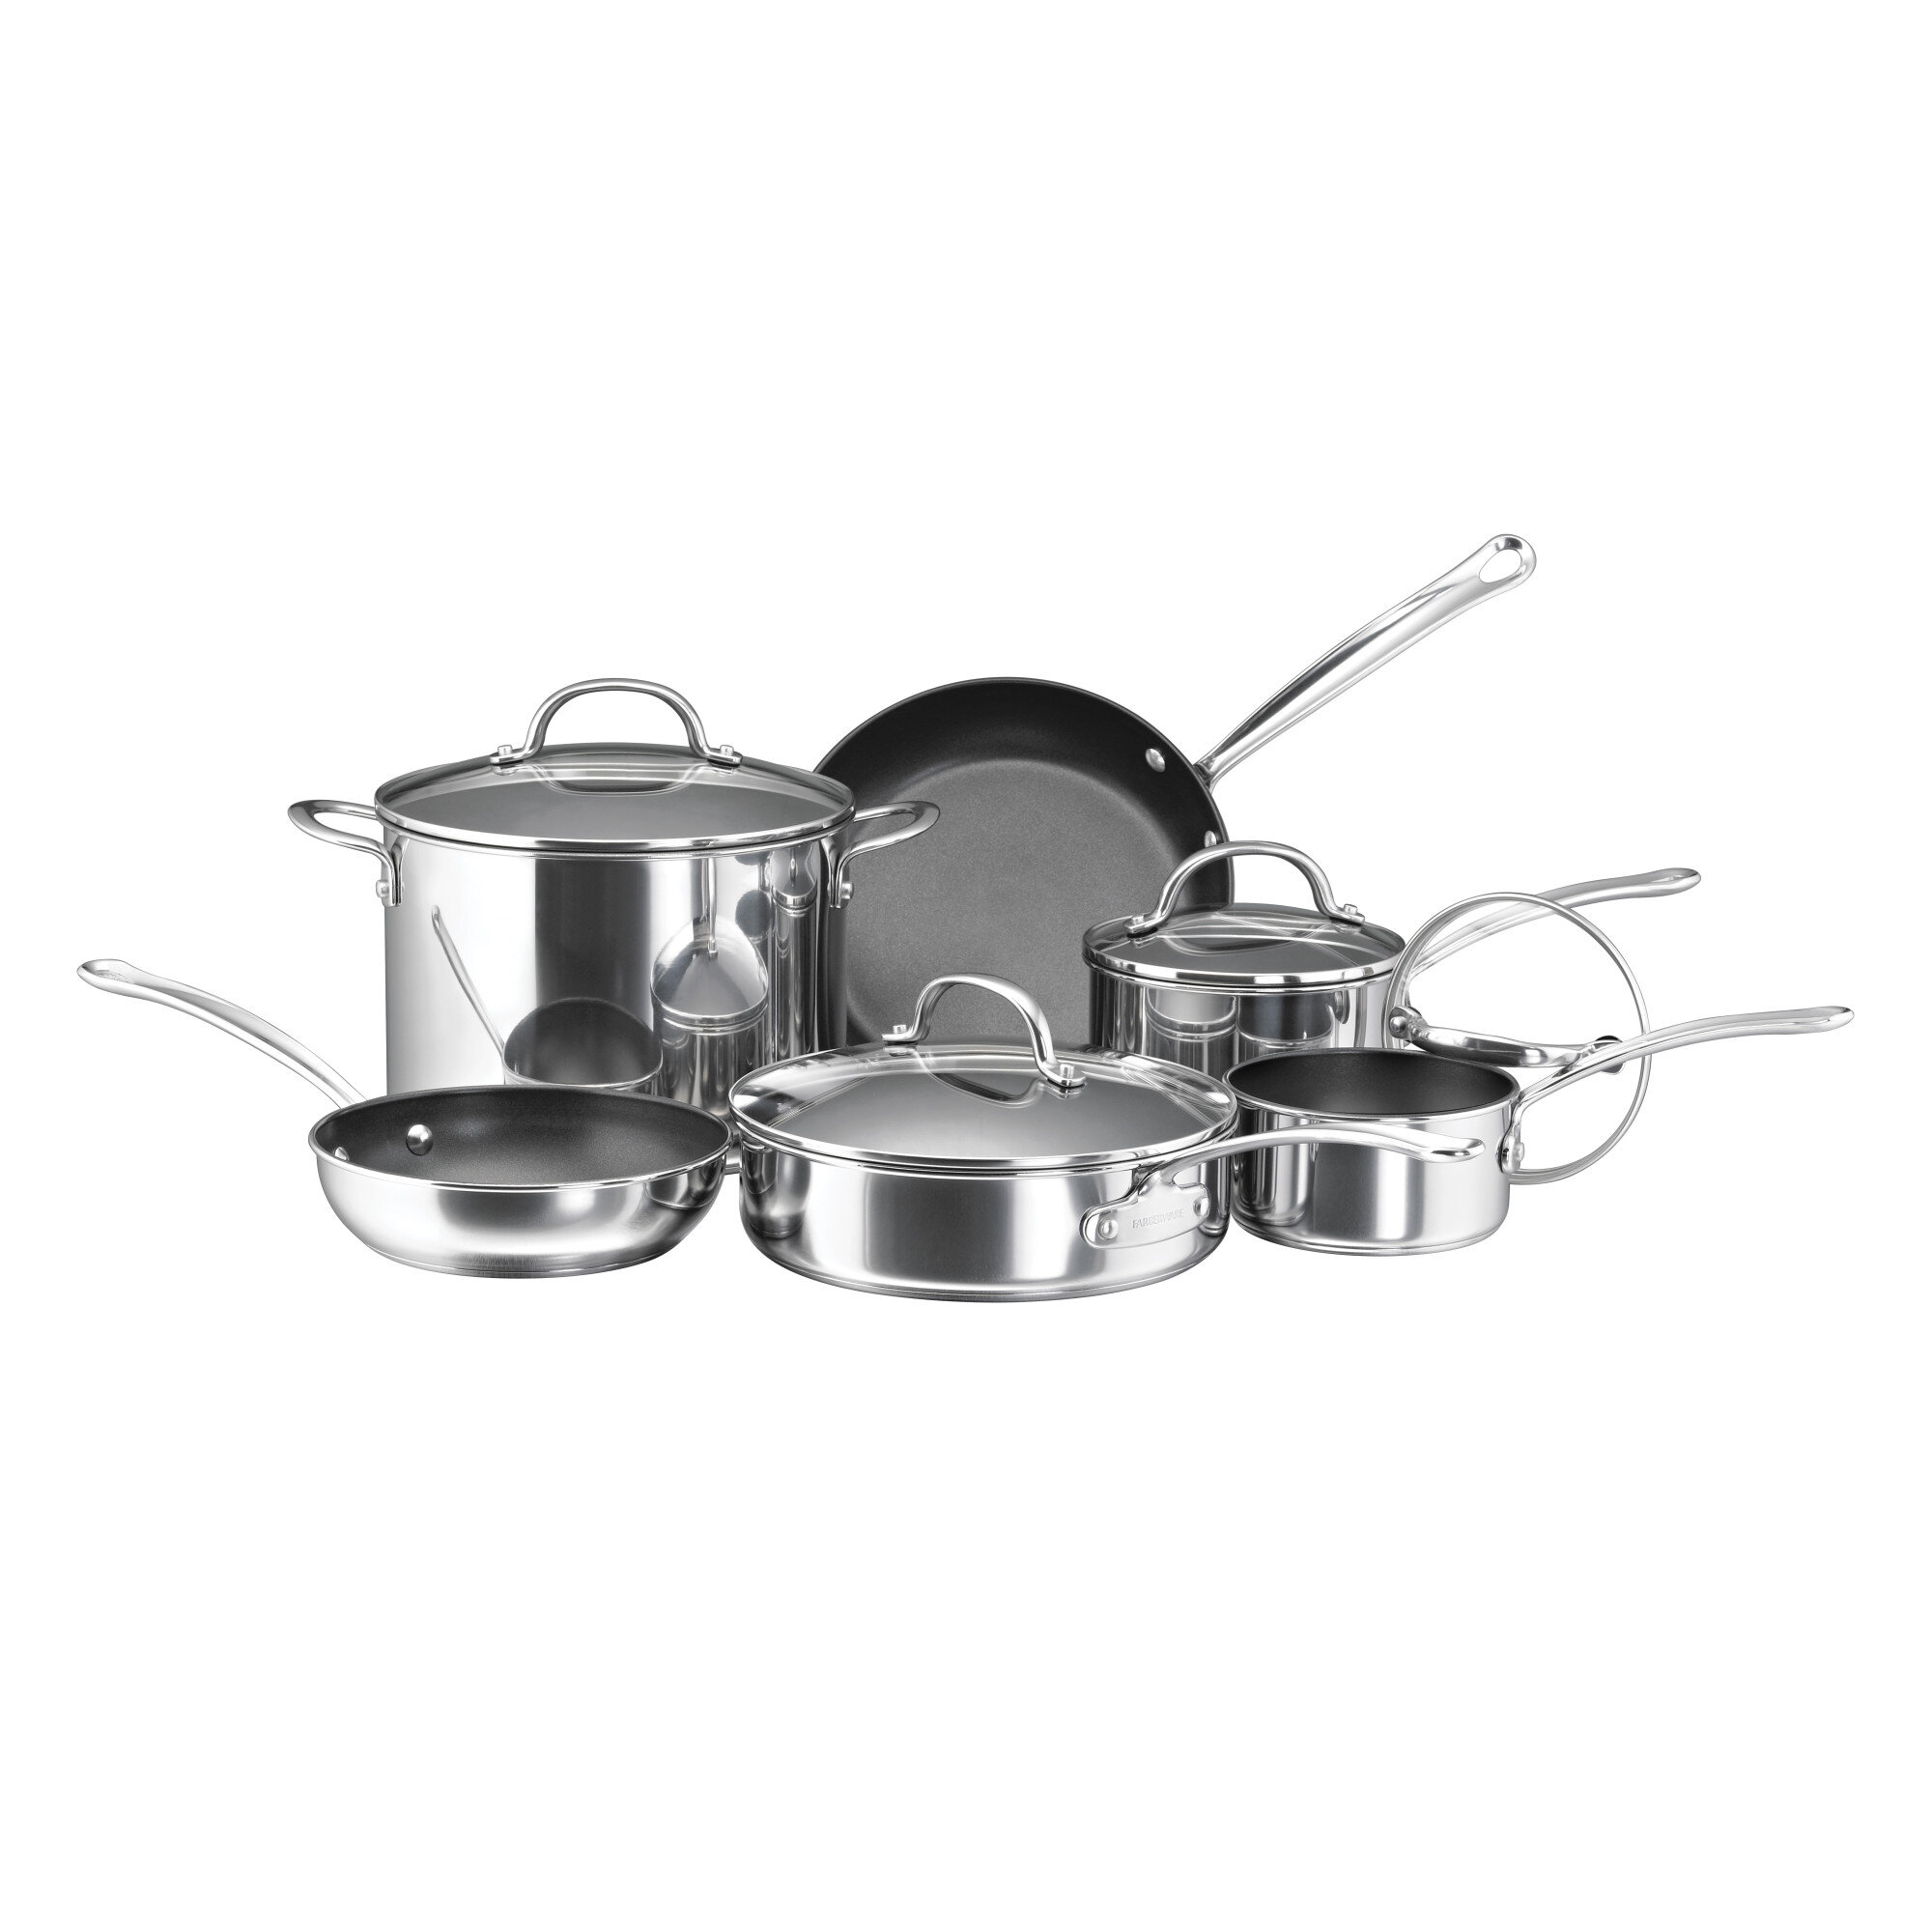 Farberware Pots and Pans Set 17-piece Nonstick Stainless Steel Kitchen  Cookware for sale online